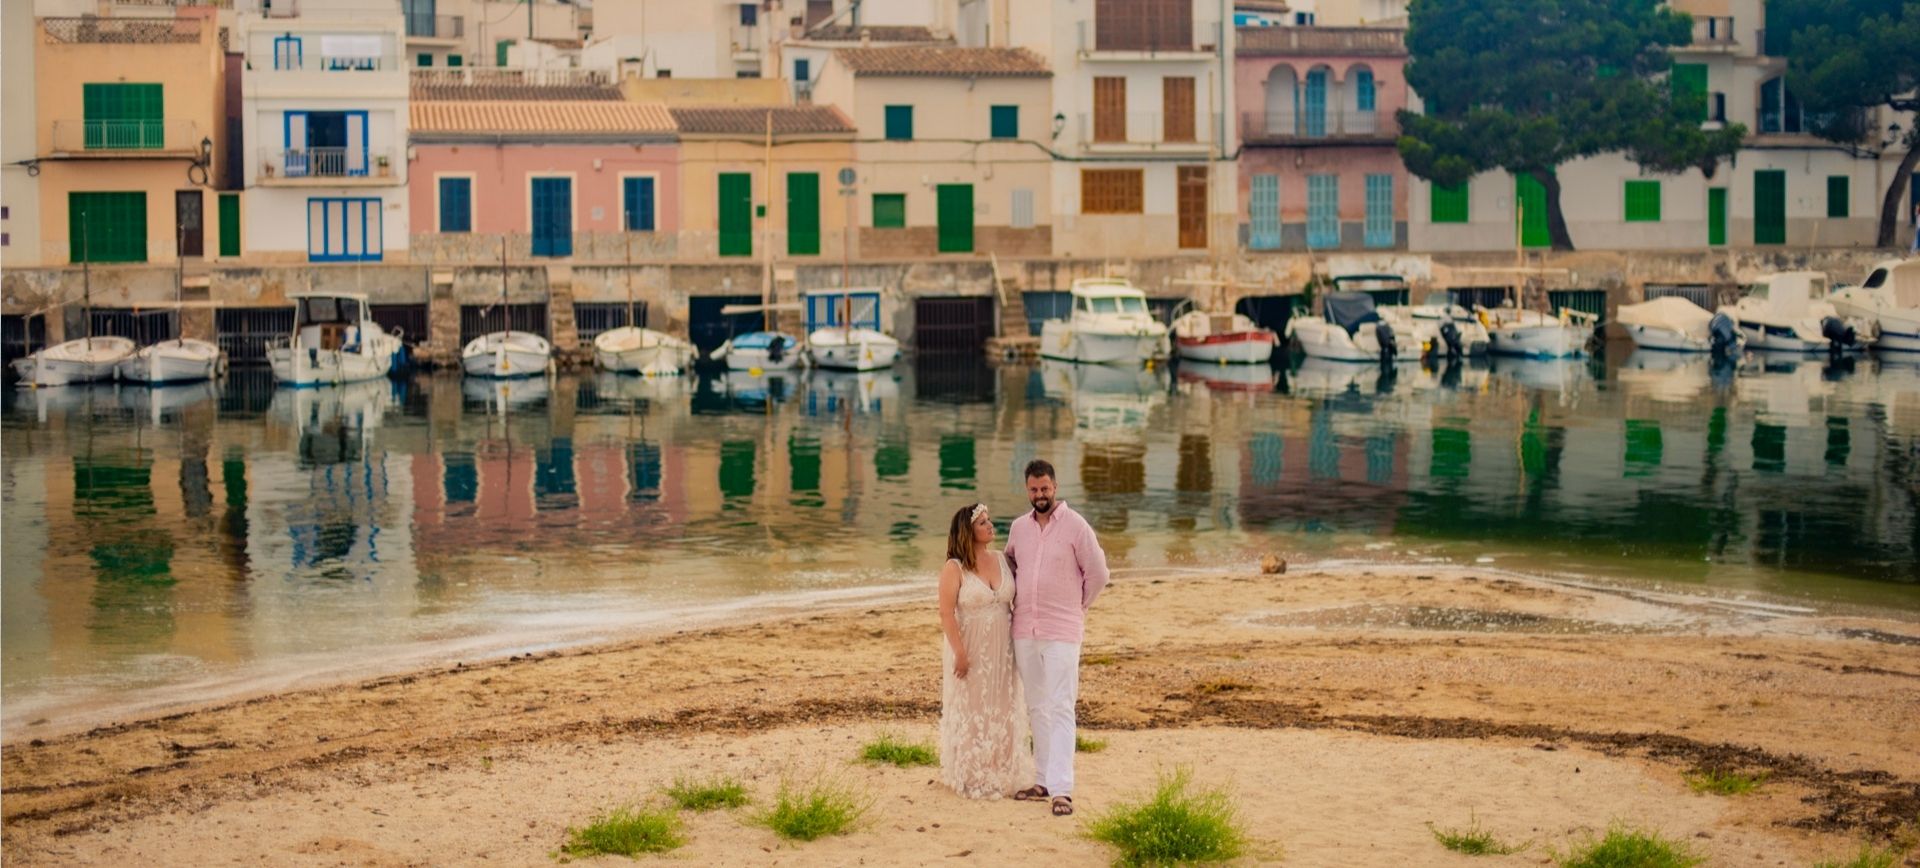 Town Elopement in Mallorca Portocolom - Bride and Groom posing on their wedding day